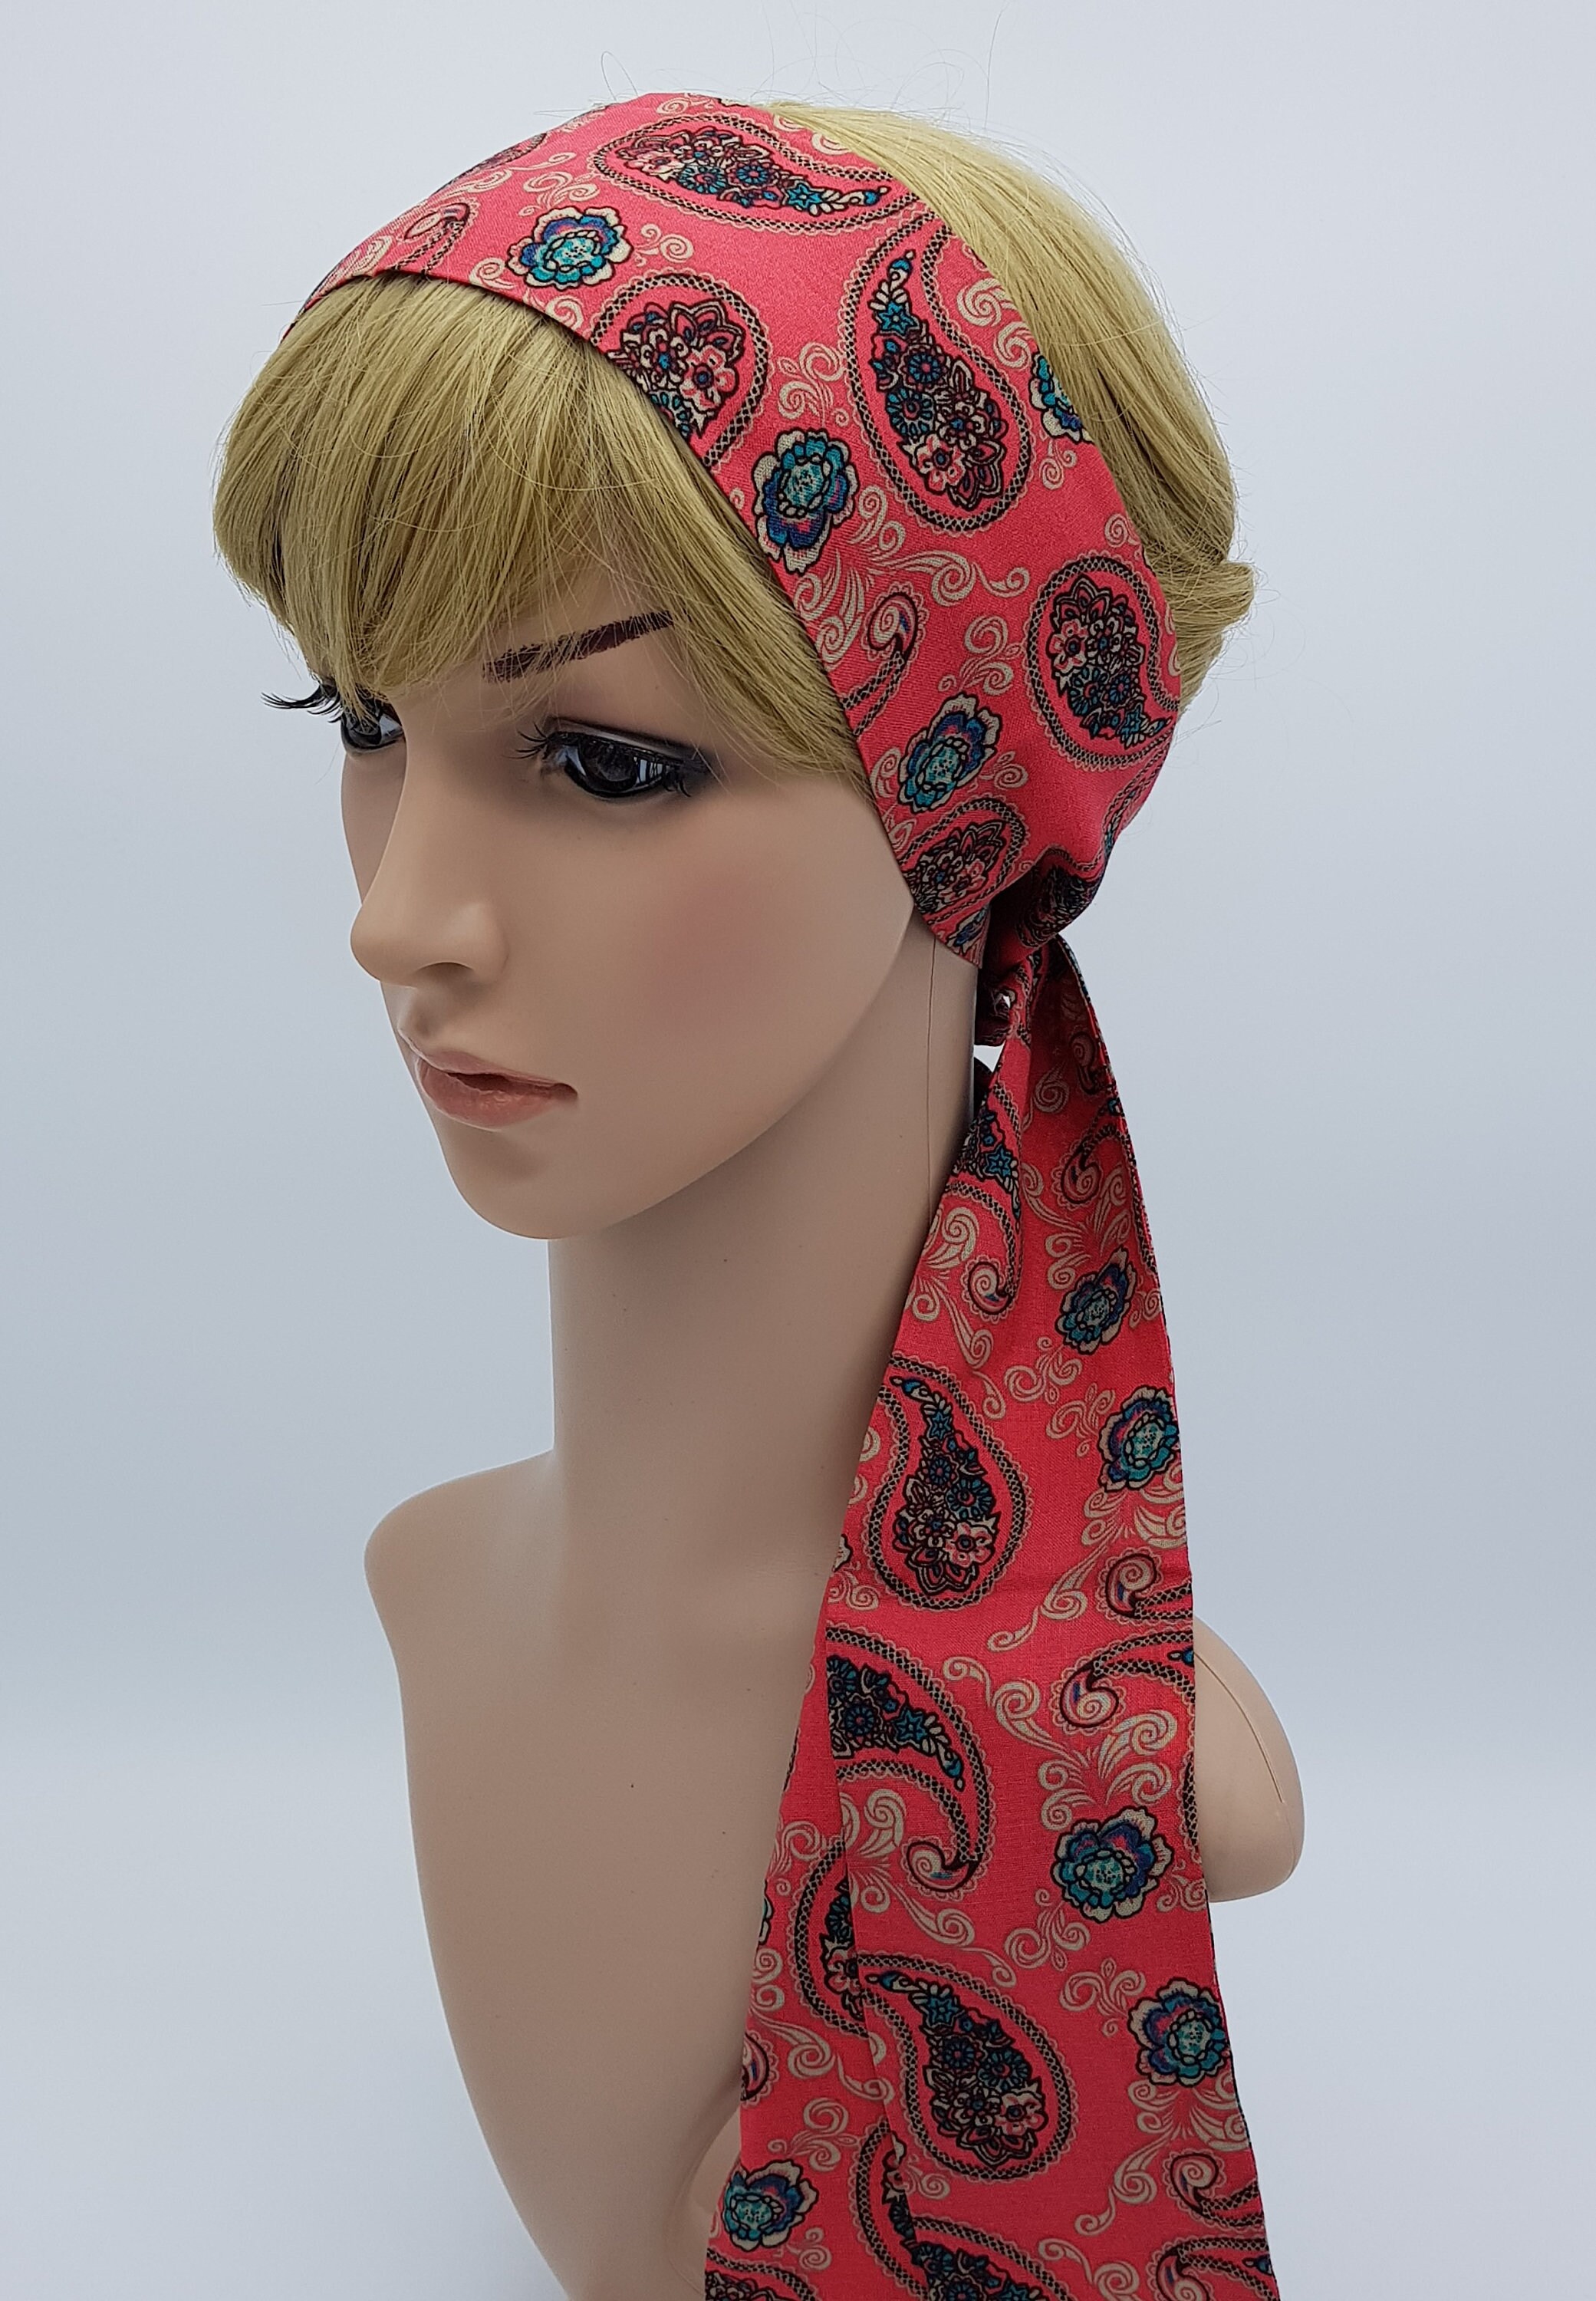 Upcycled Genuine LV Headwrap by Keep It Gypsy